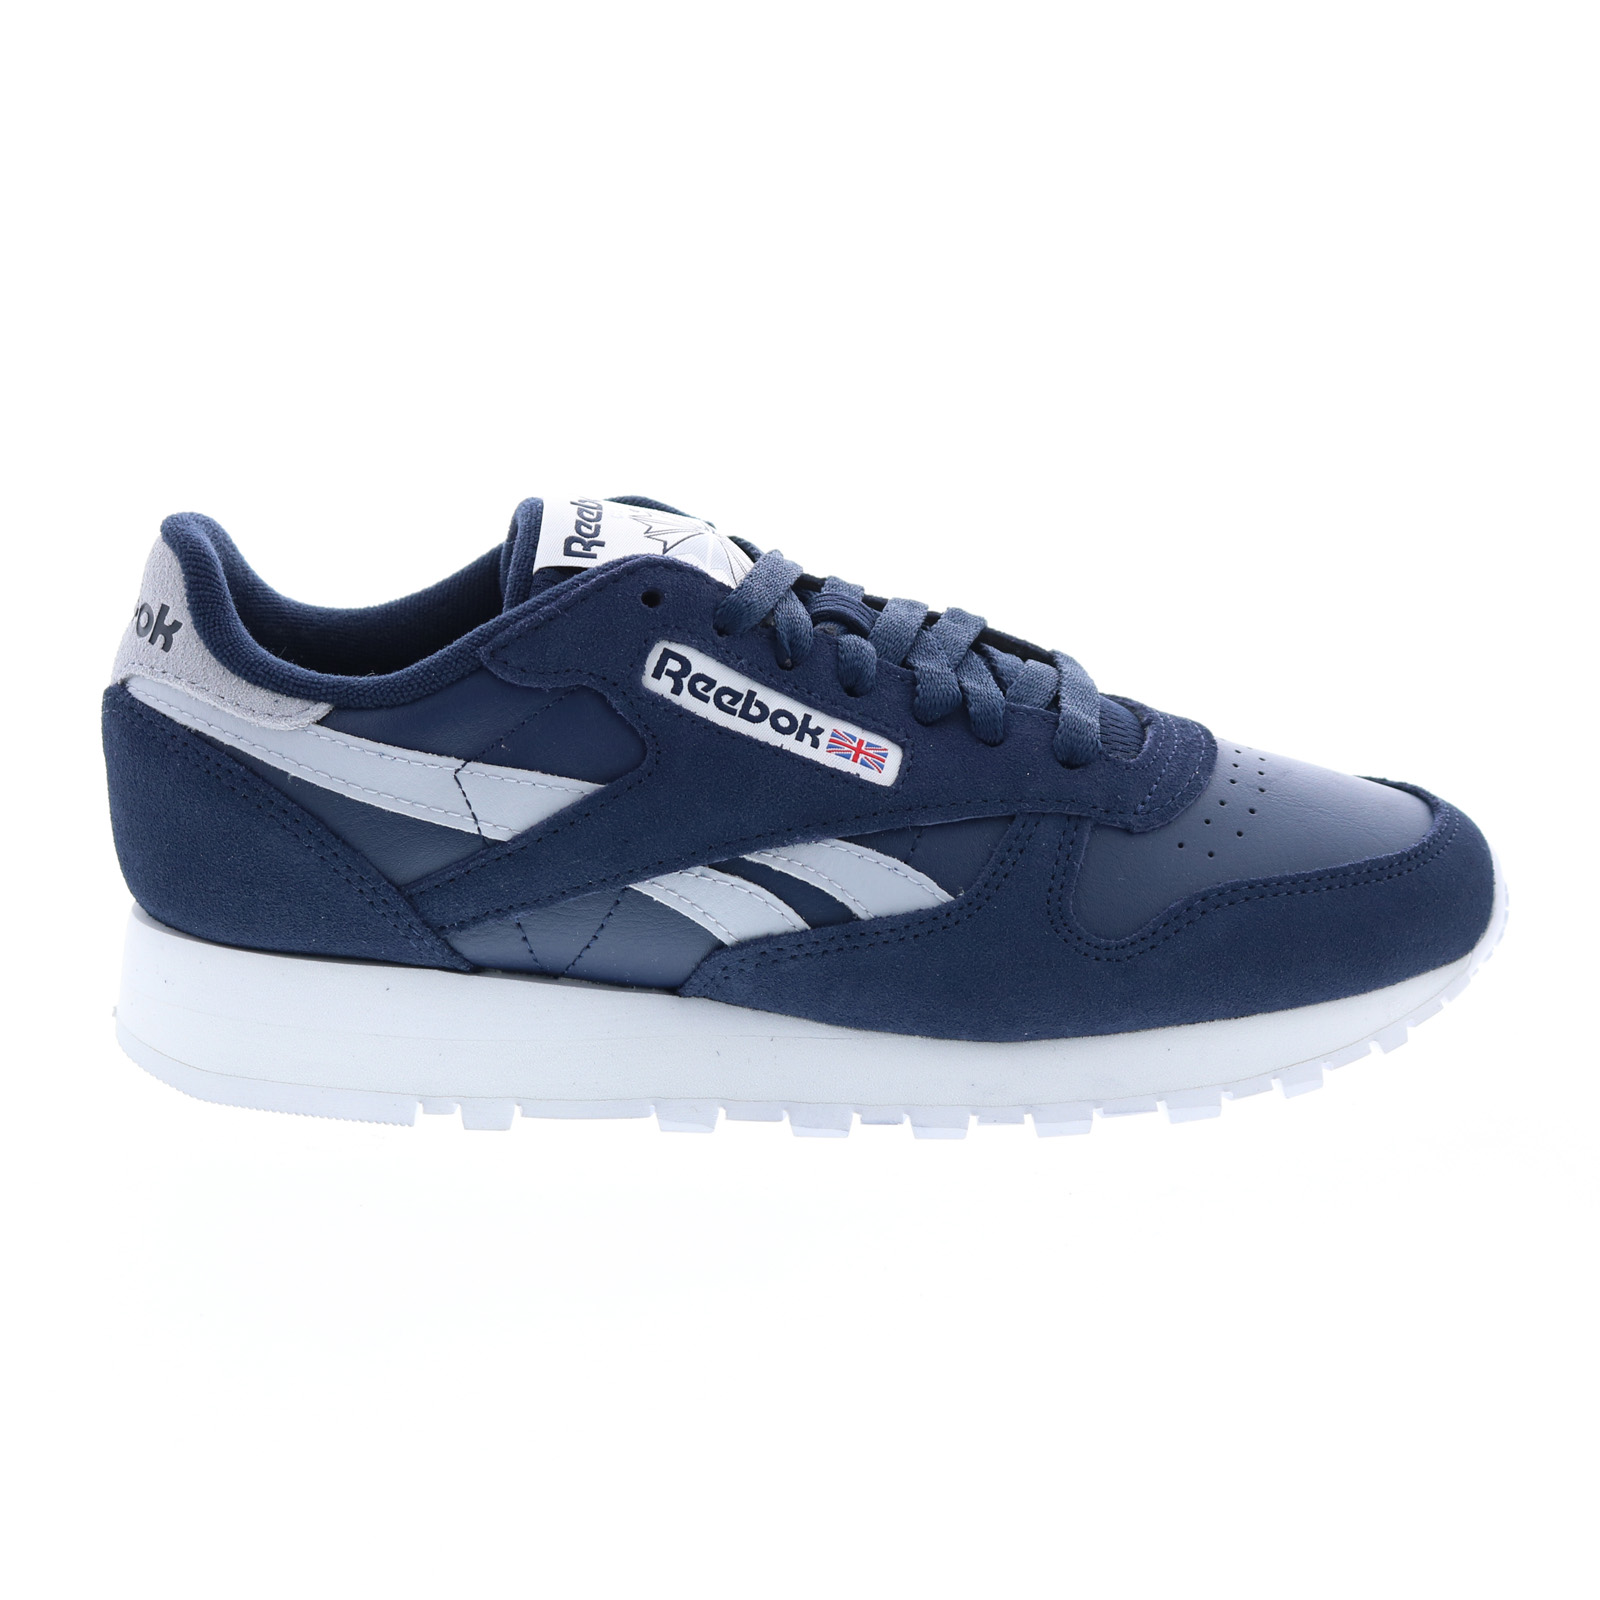 Reebok Adult Mens Classic Leather Lifestyle Sneakers - Walmart.com